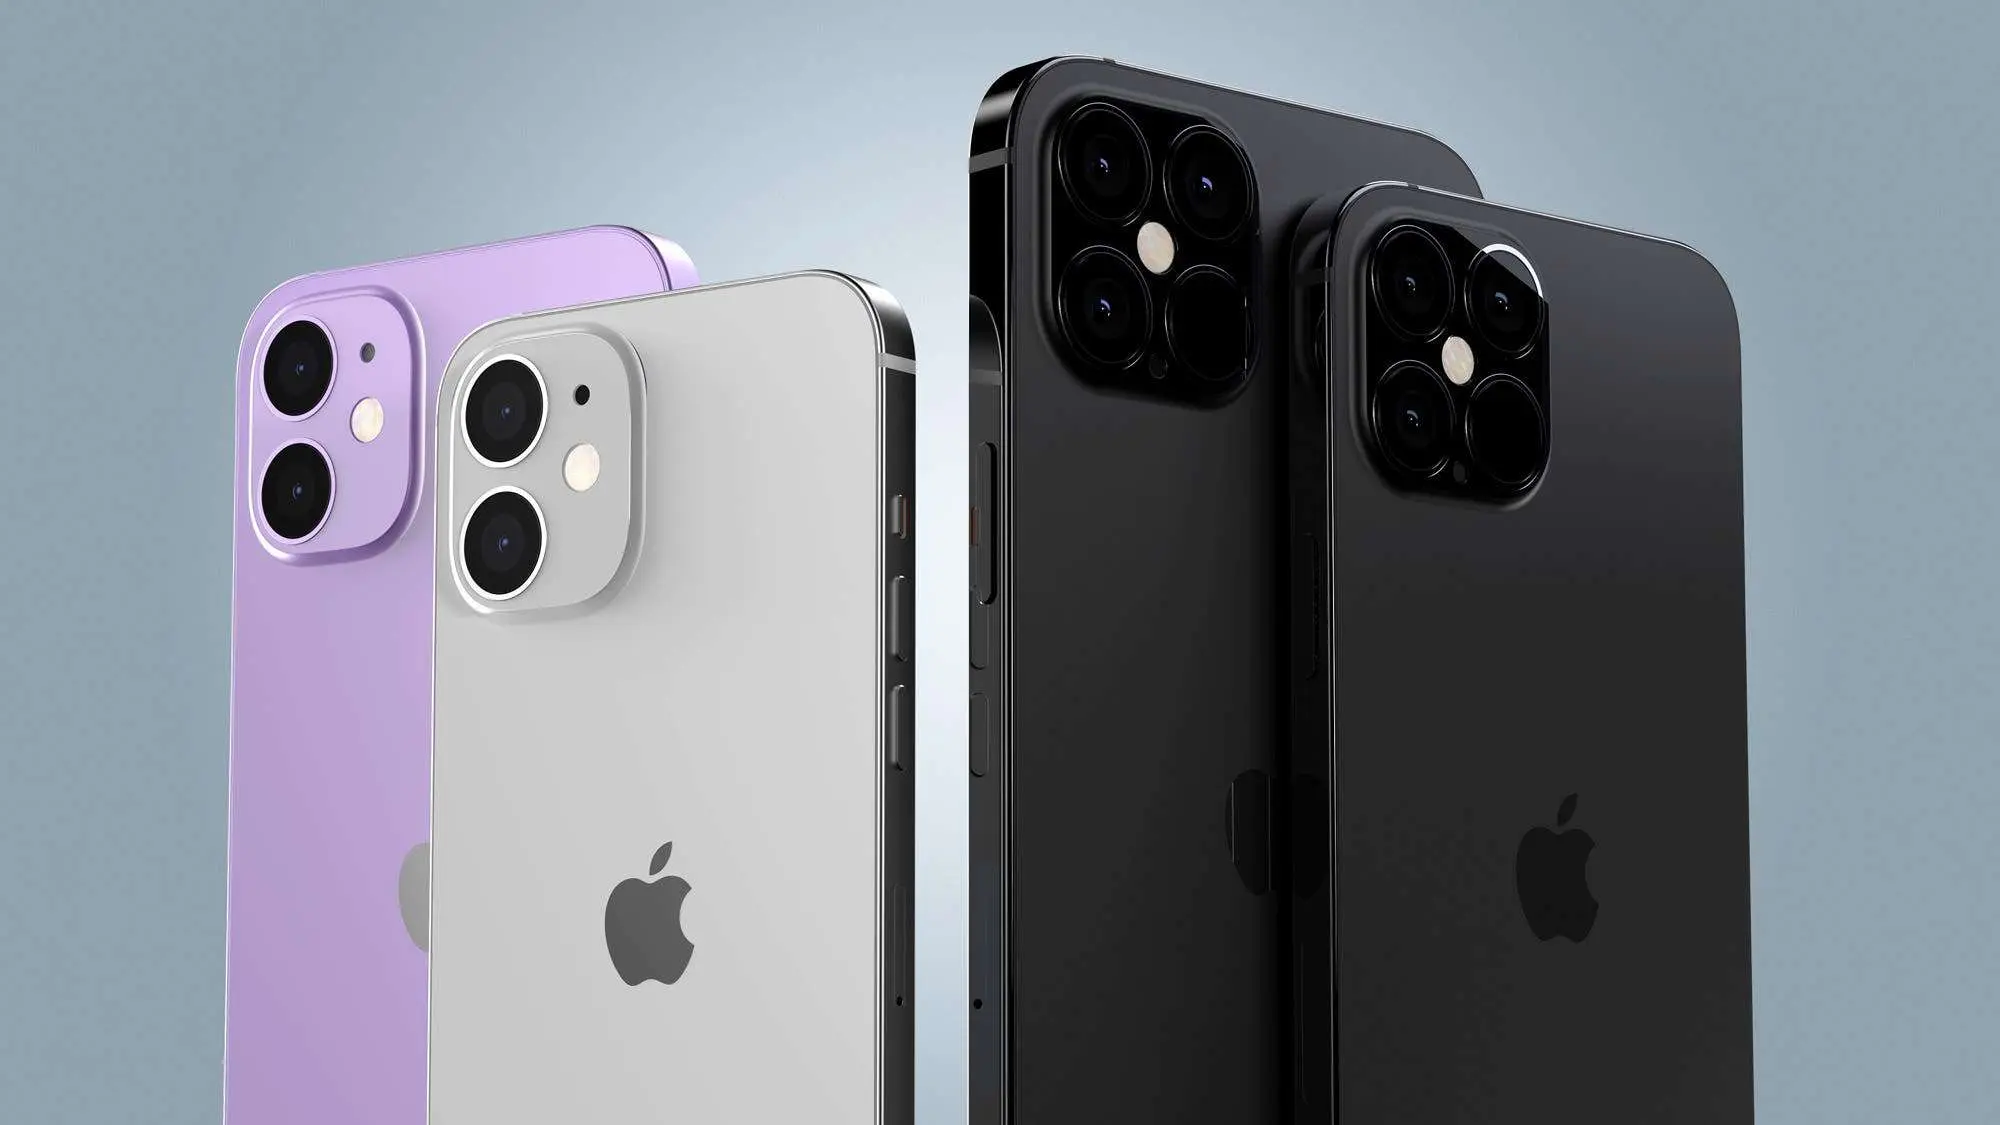 Is the iPhone 12 mini 5G?